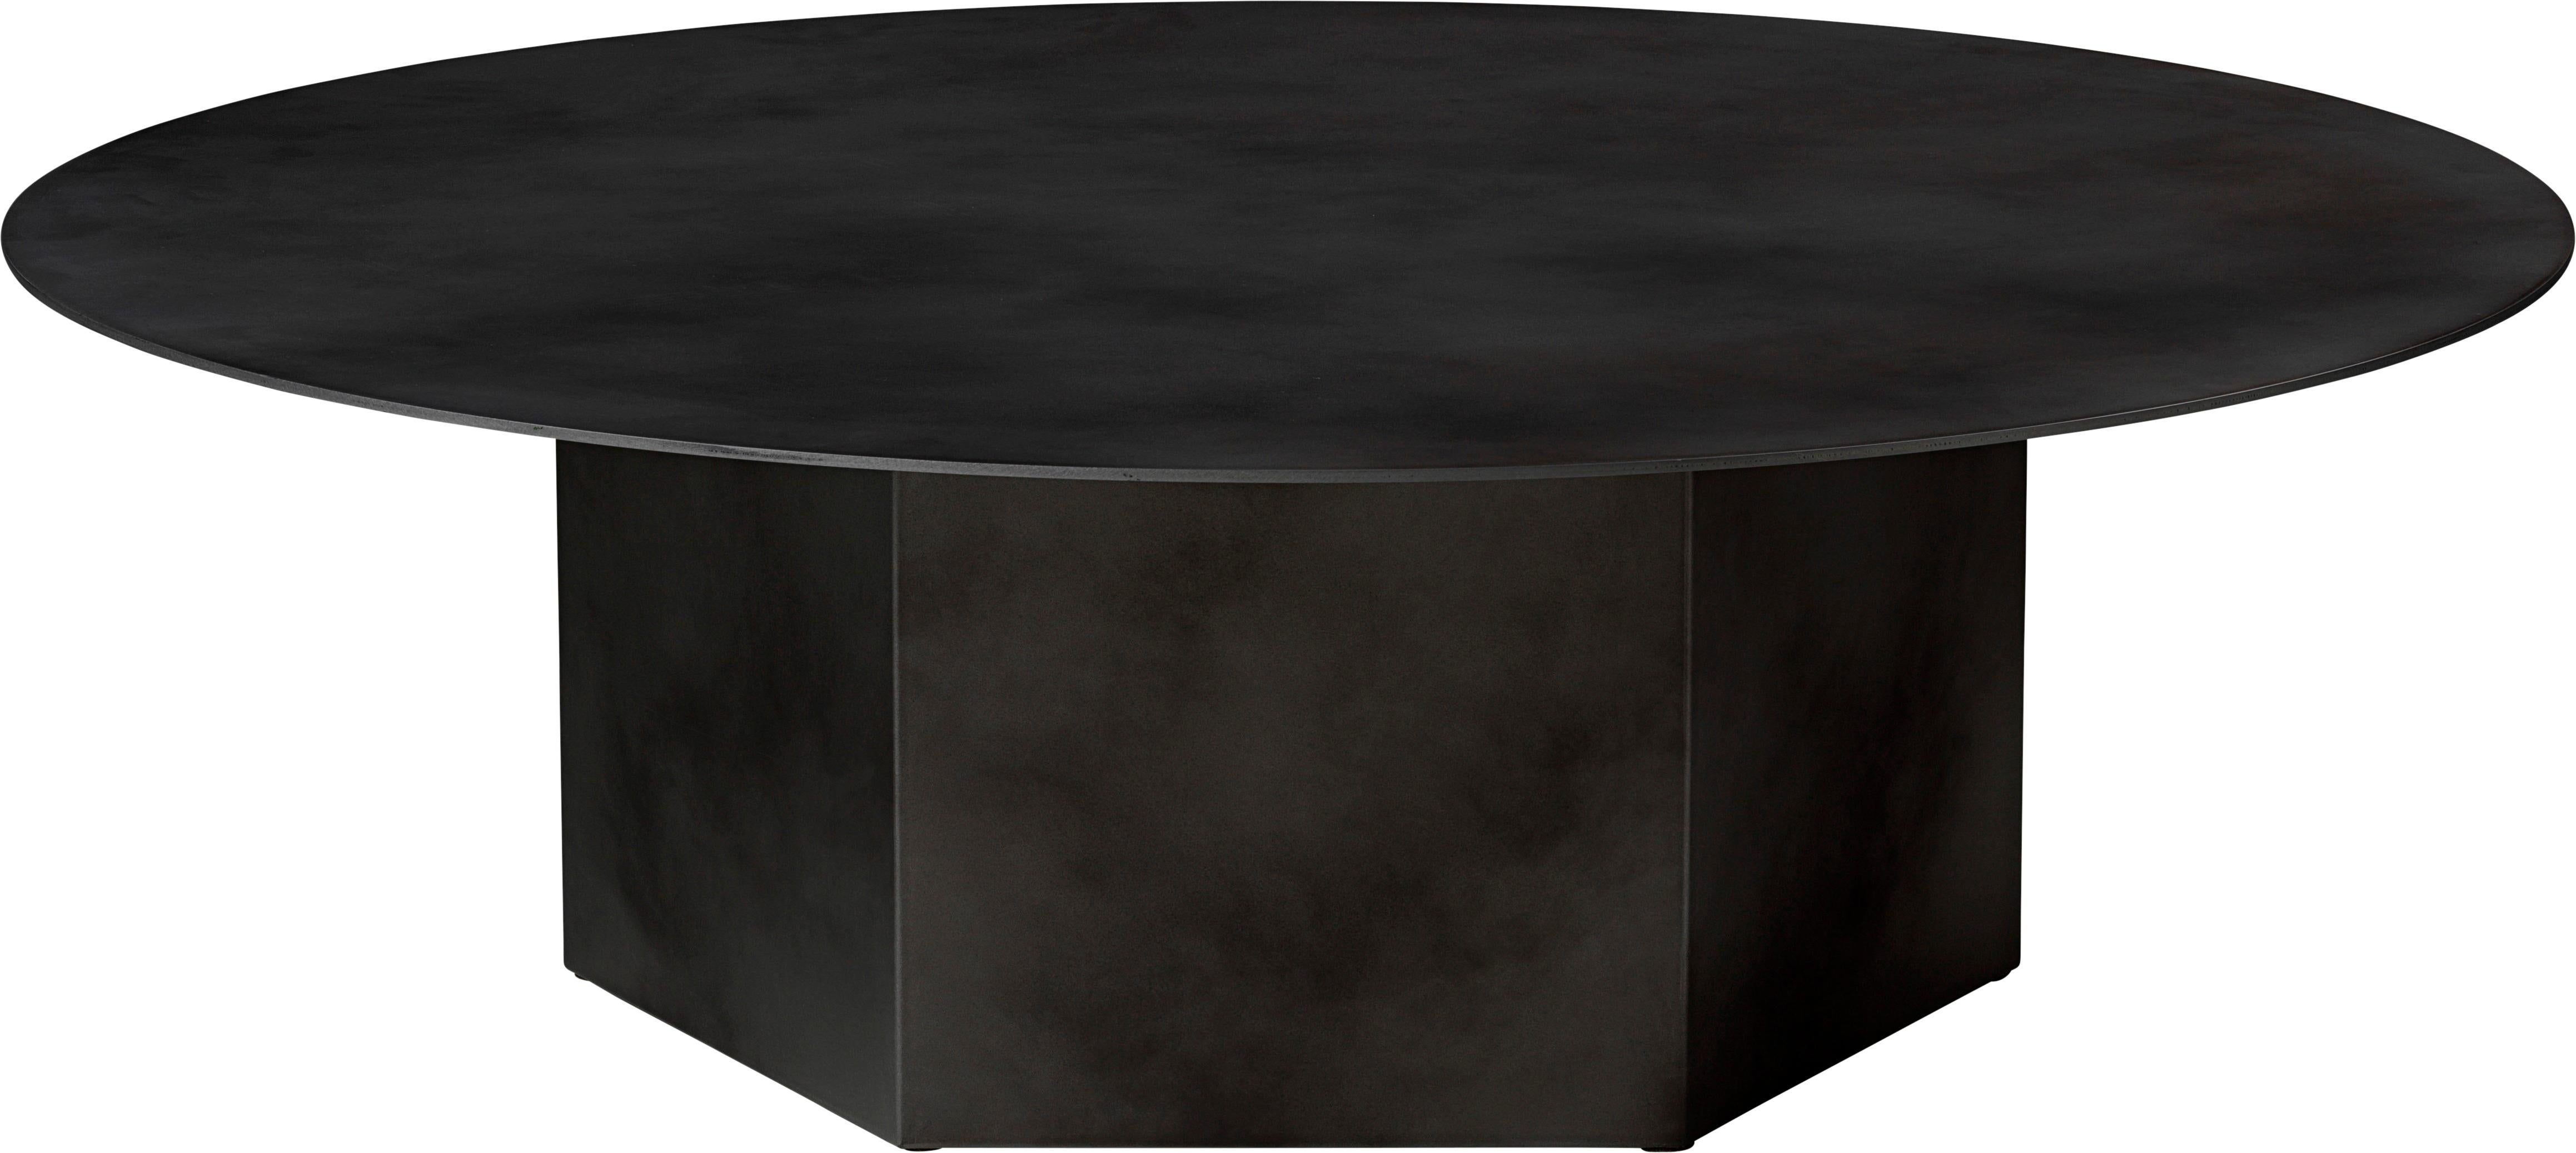 Mid-Century Modern Large Steel Epic Coffee Table by Gamfratesi for Gubi For Sale